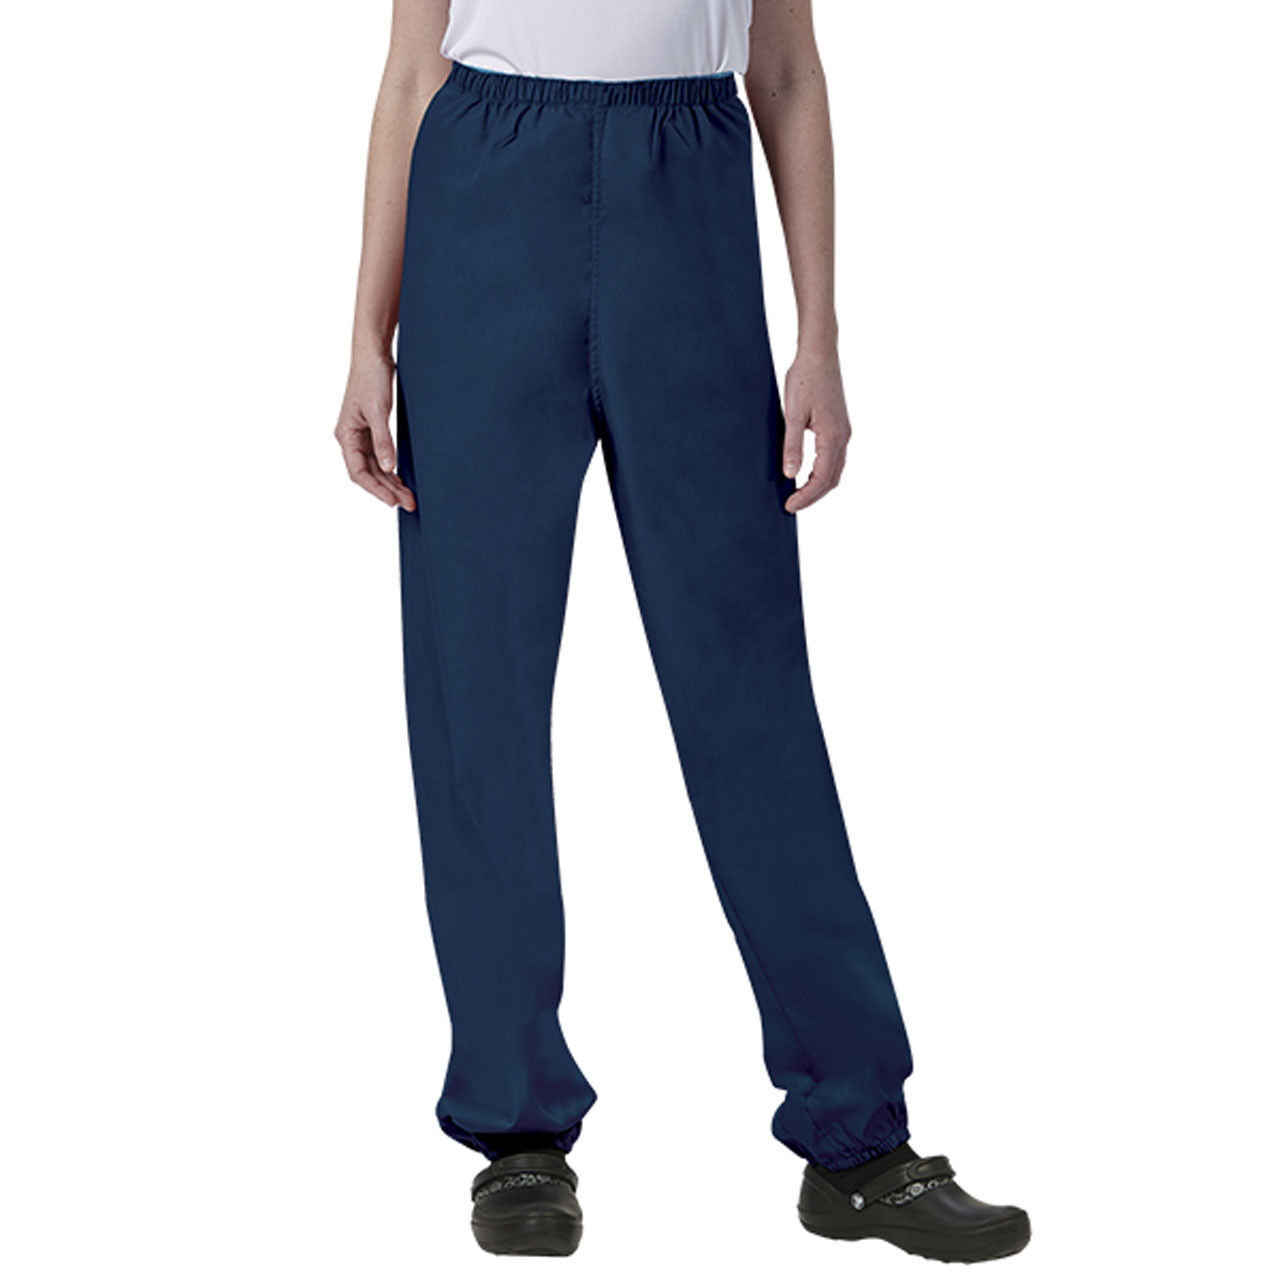 Are these fashion seal healthcare scrub pants reversible?